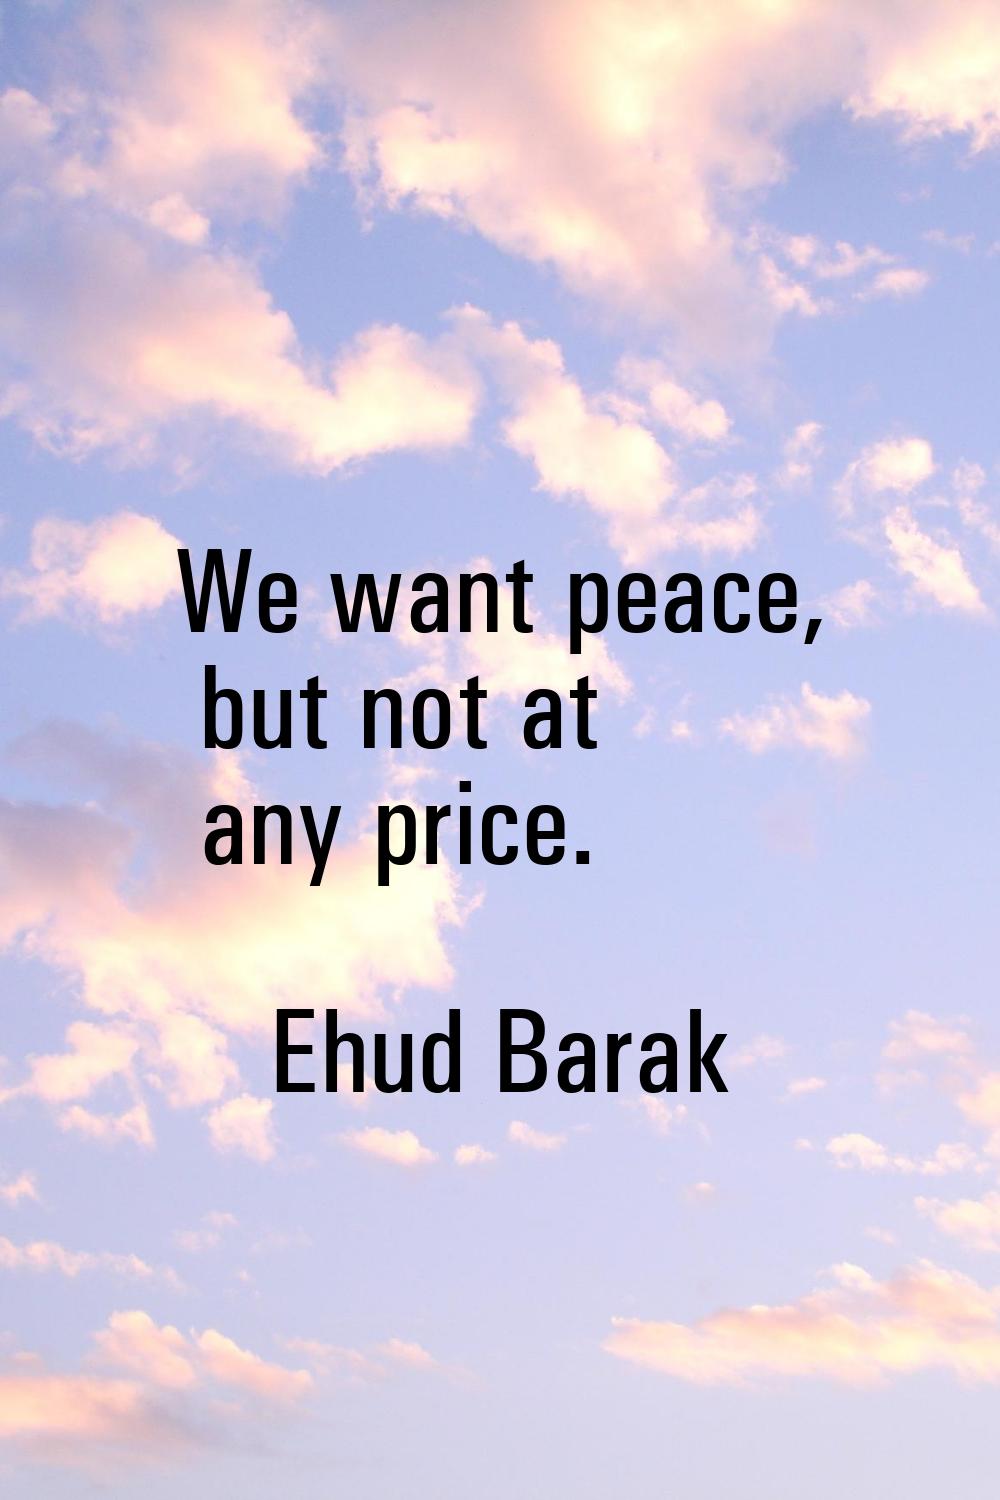 We want peace, but not at any price.